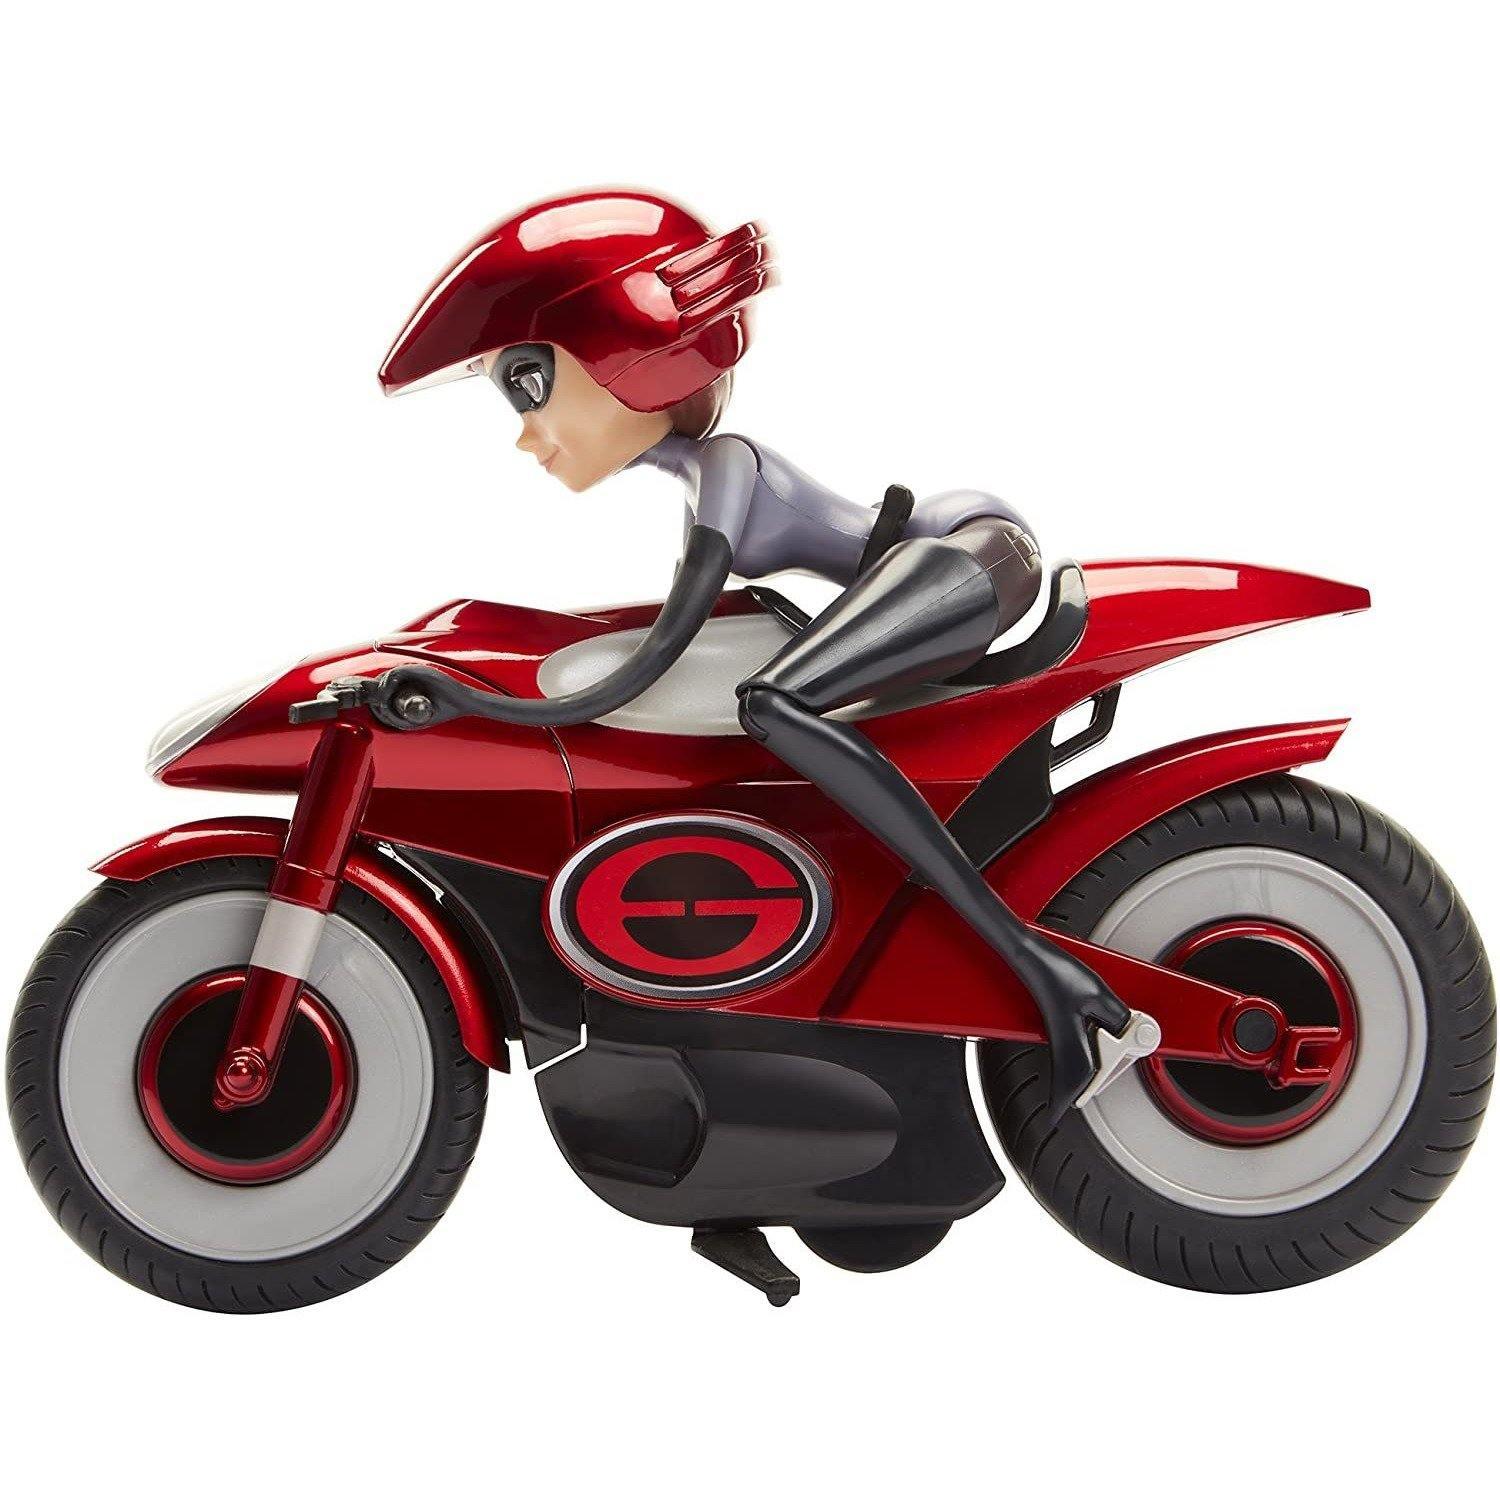 The Incredibles 2 Speeding Elasticycle Playset with Removable Elastigirl Figure - BumbleToys - 4+ Years, Boys, Clearance, Girls, Incre, Incredibles